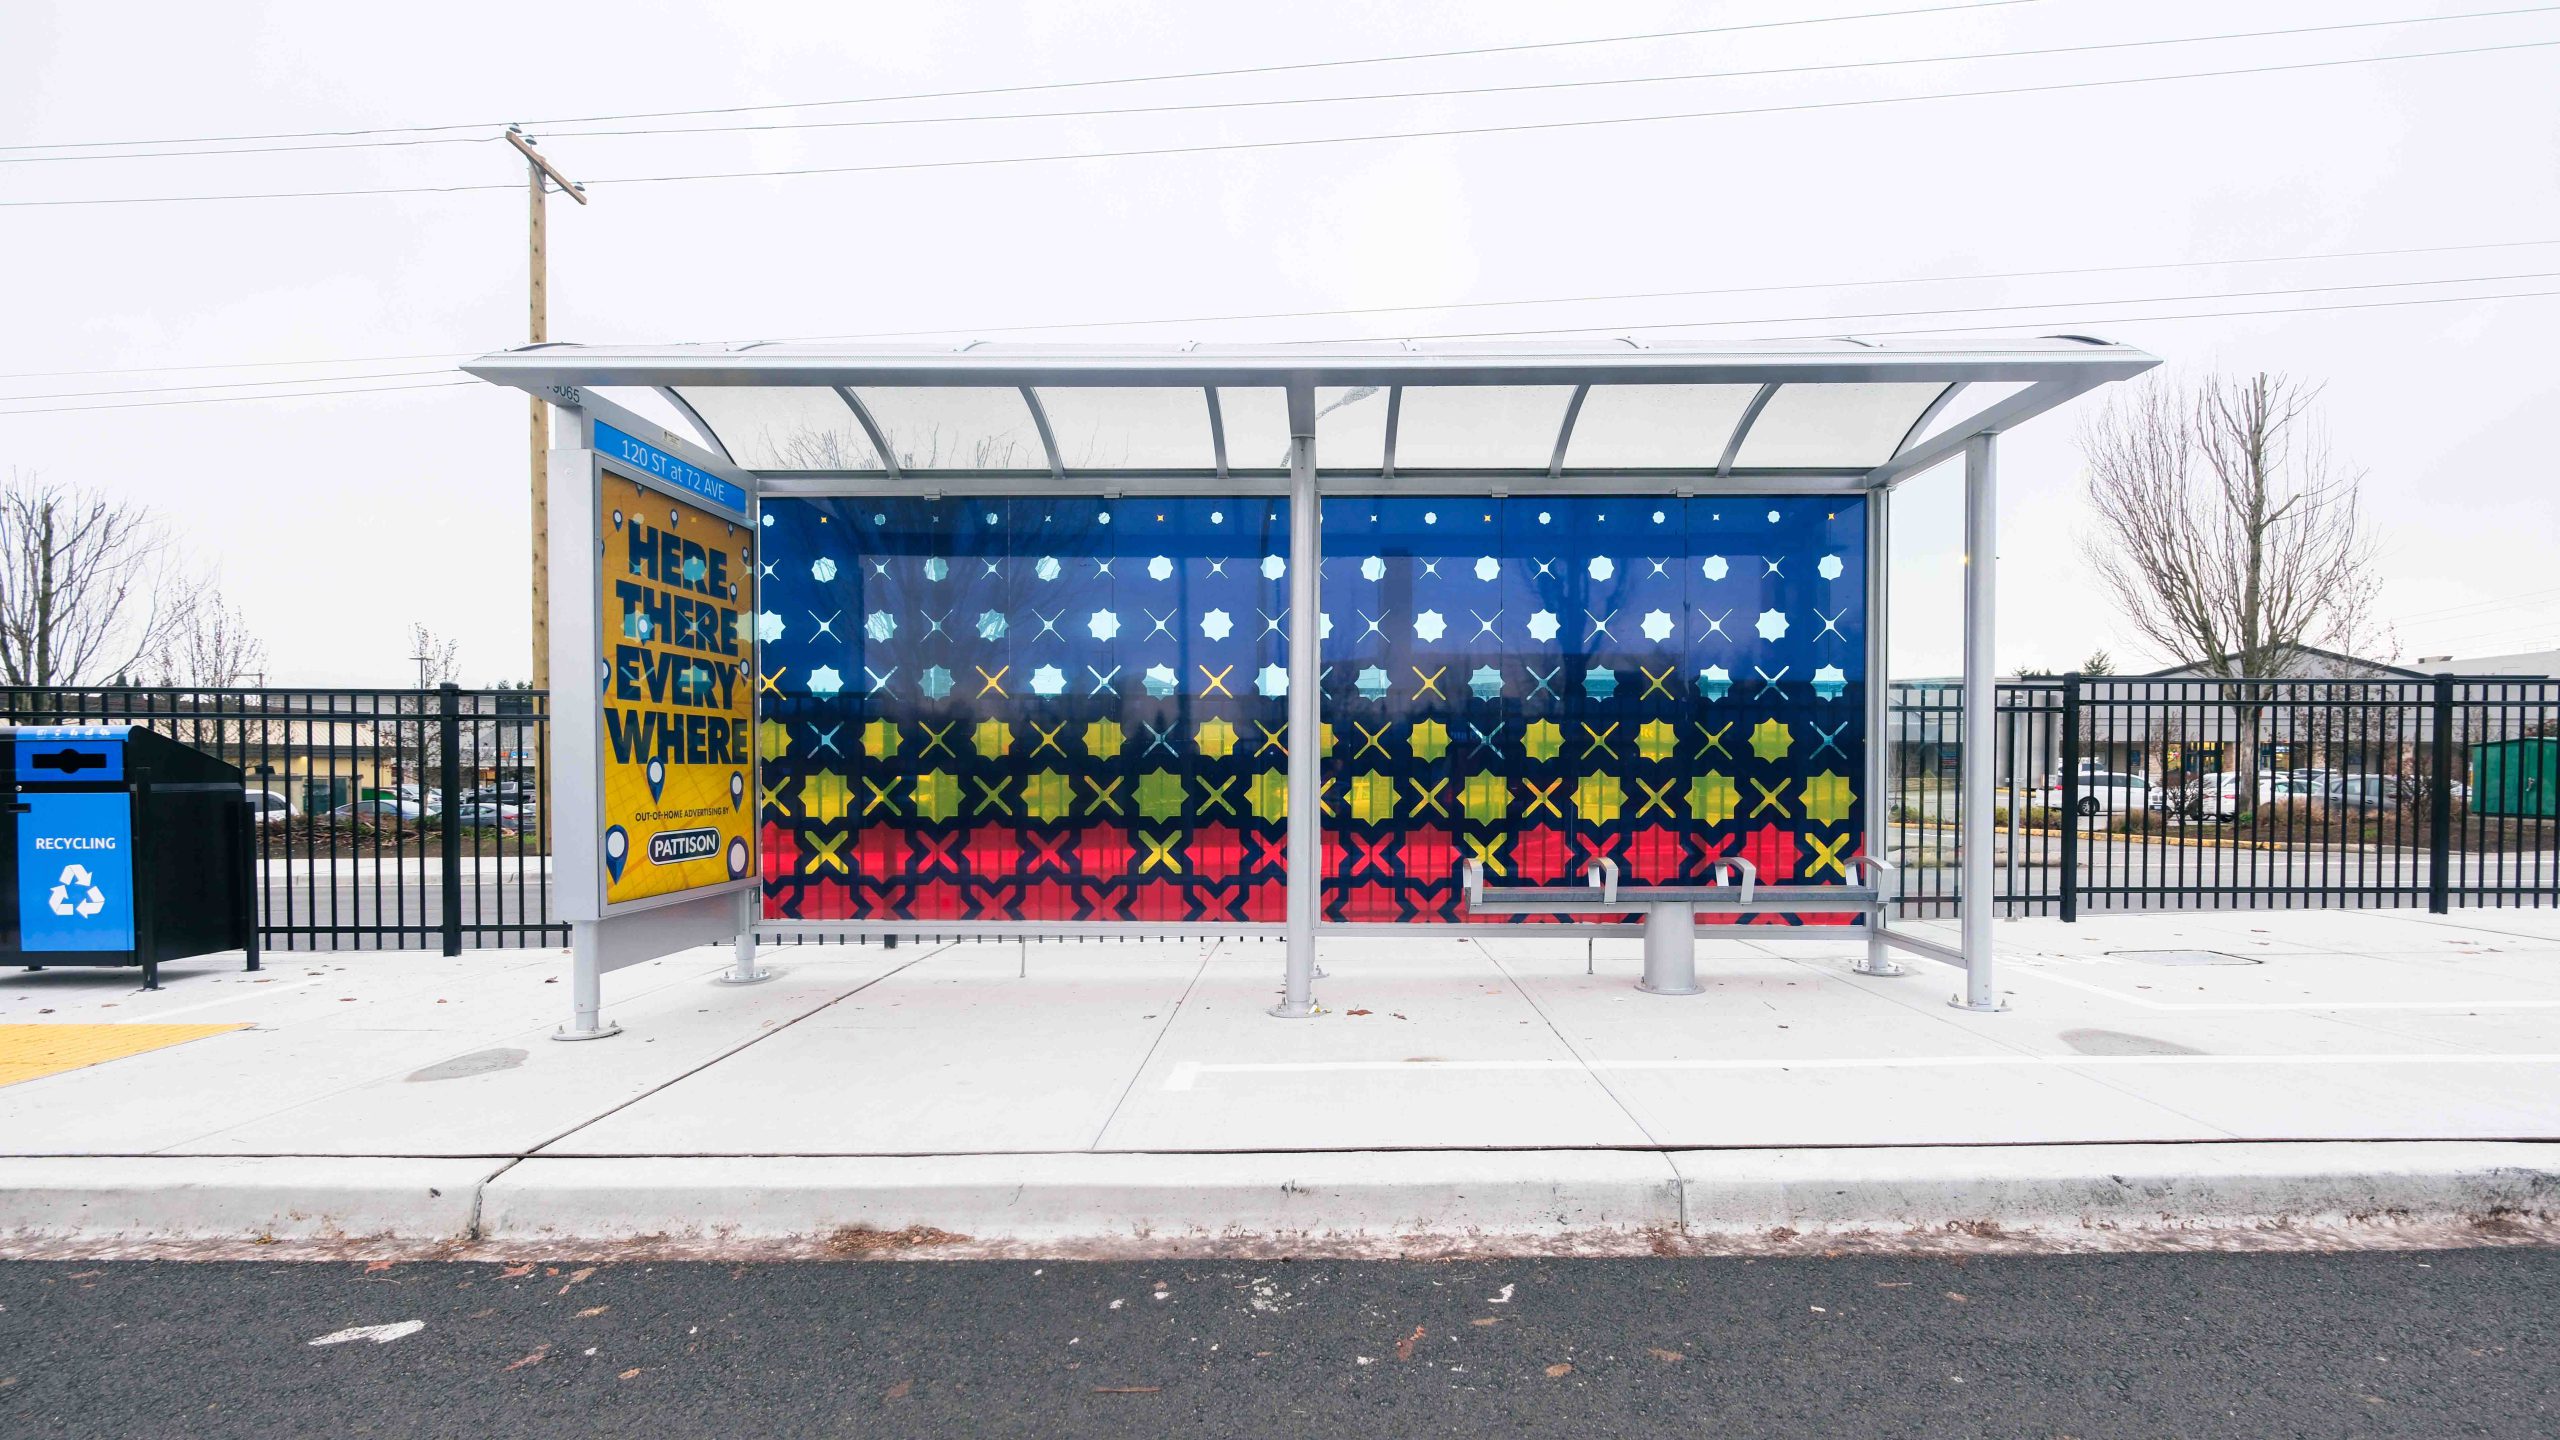 Jessie Sohpaul's art on the Scott Road and 72nd Avenue median centre island bus stop